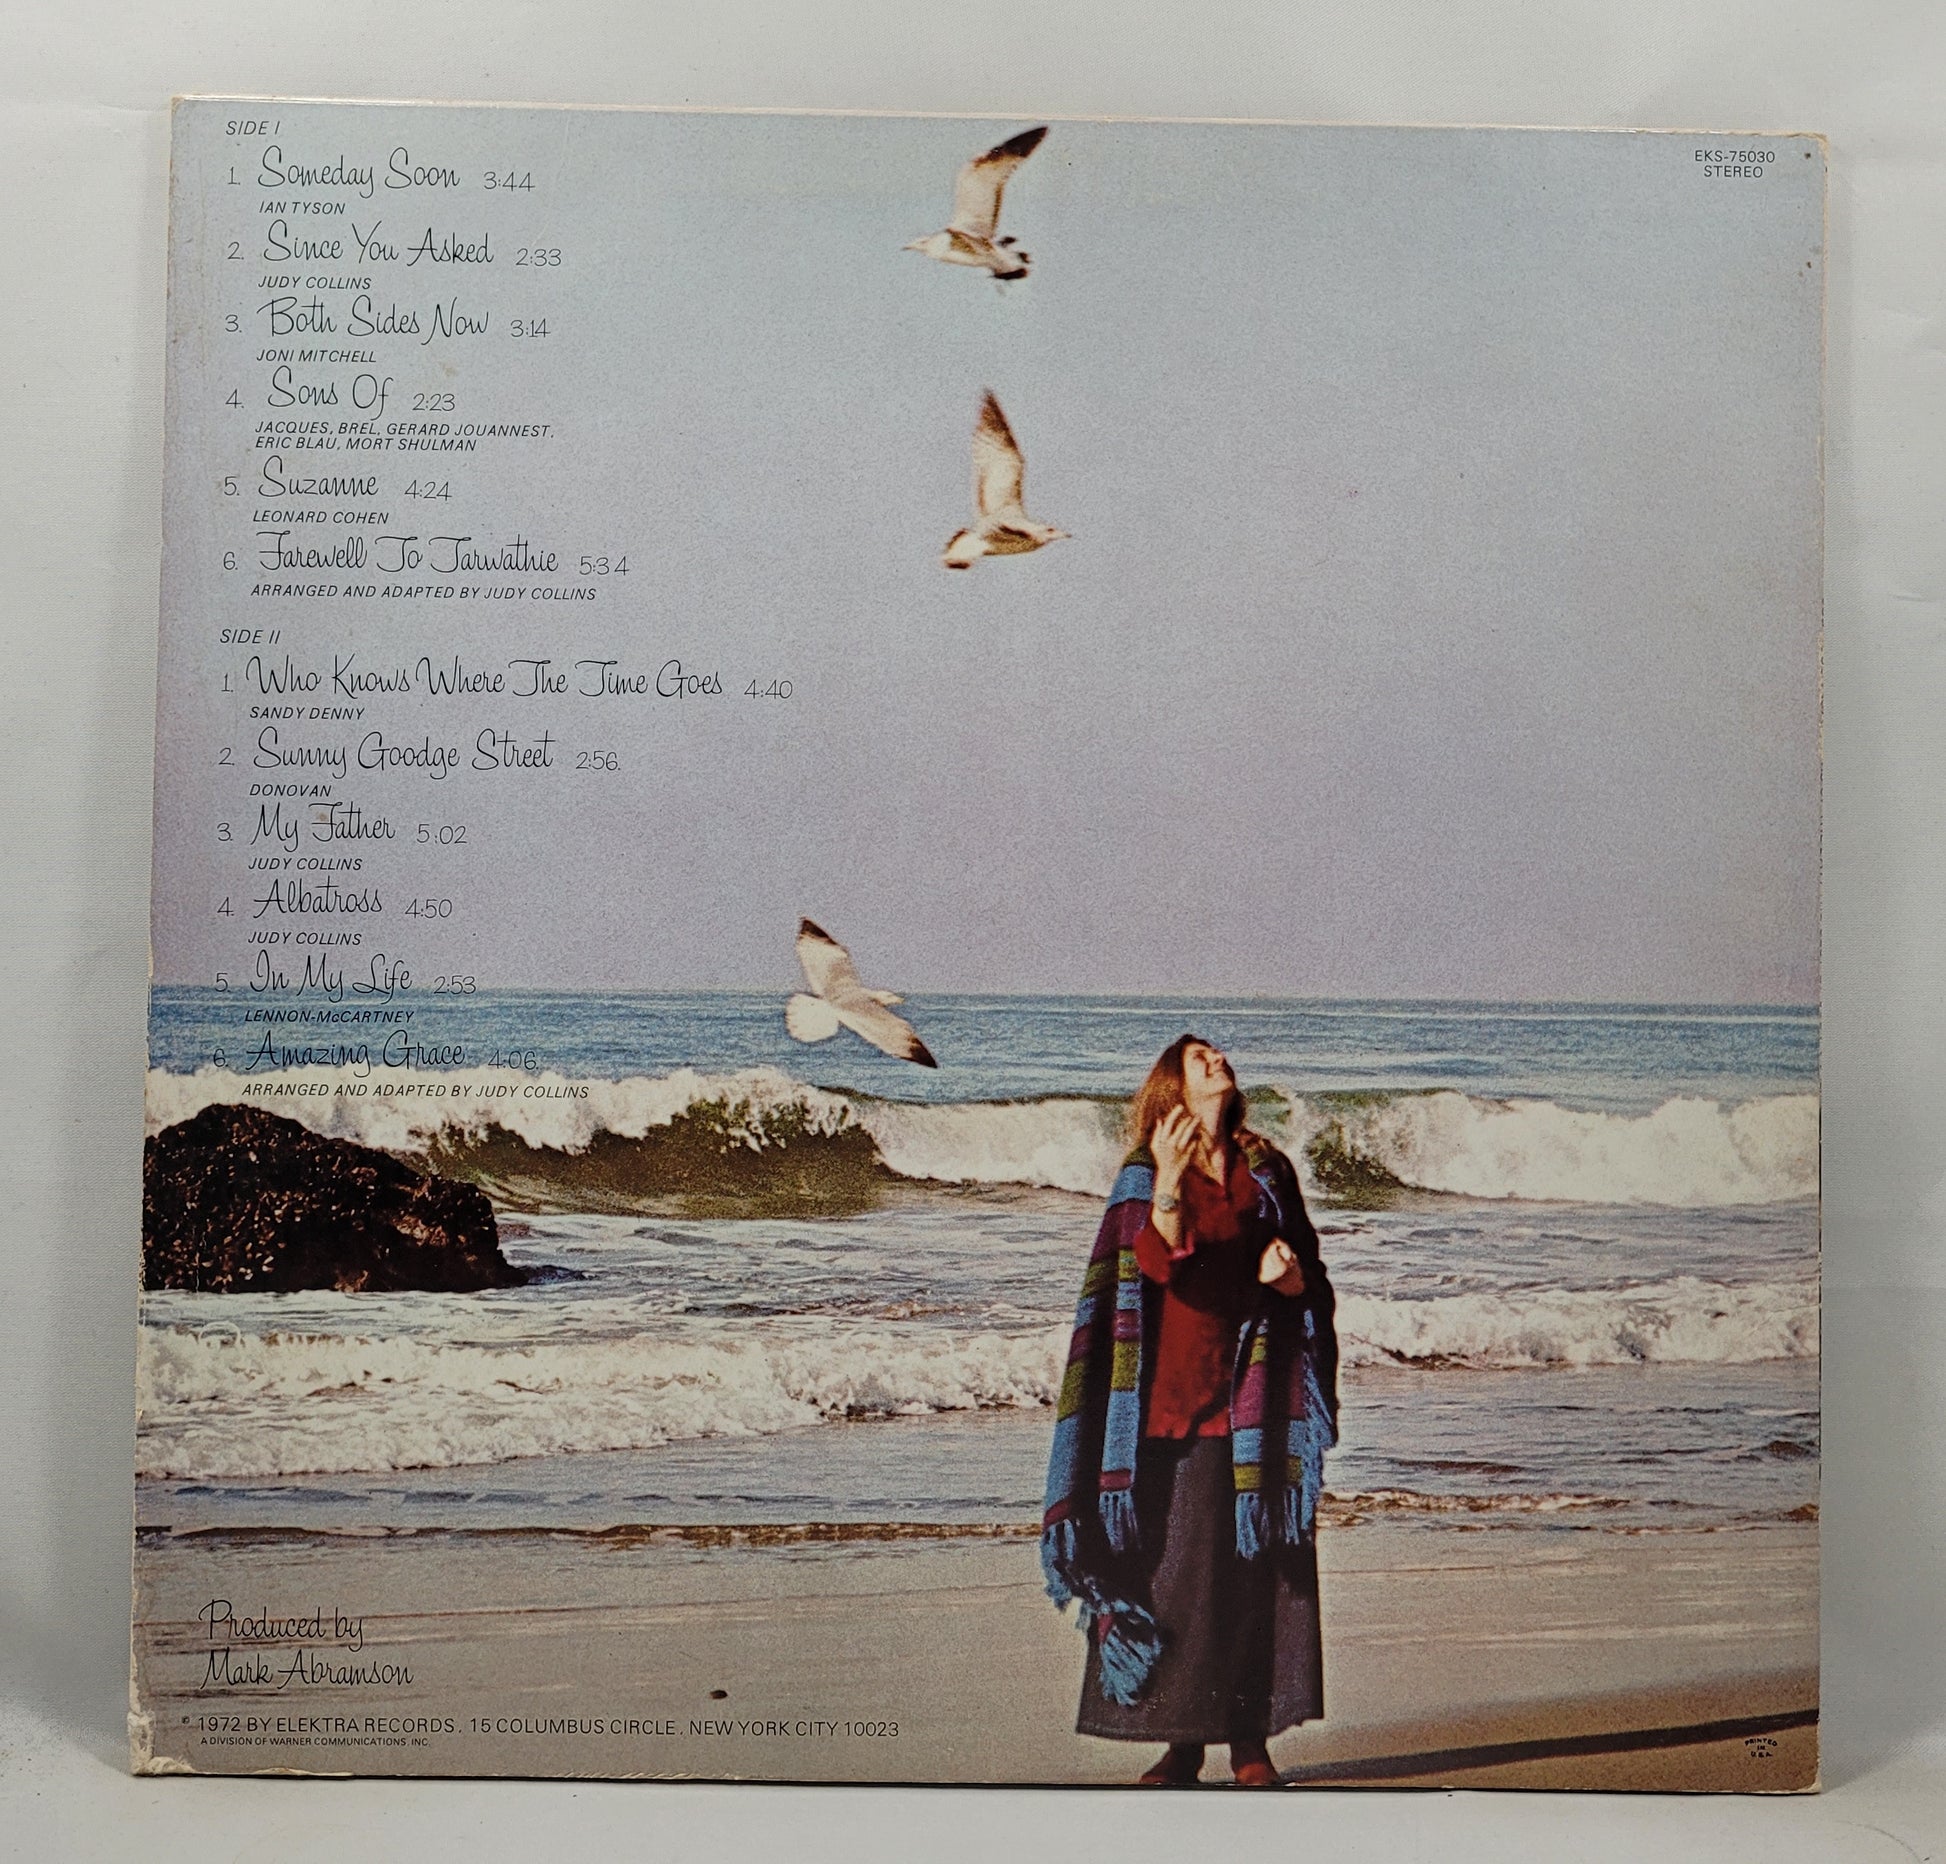 Judy Collins - Colors of the Day (The Best of Judy Collins) [1972 Used Vinyl Record LP]